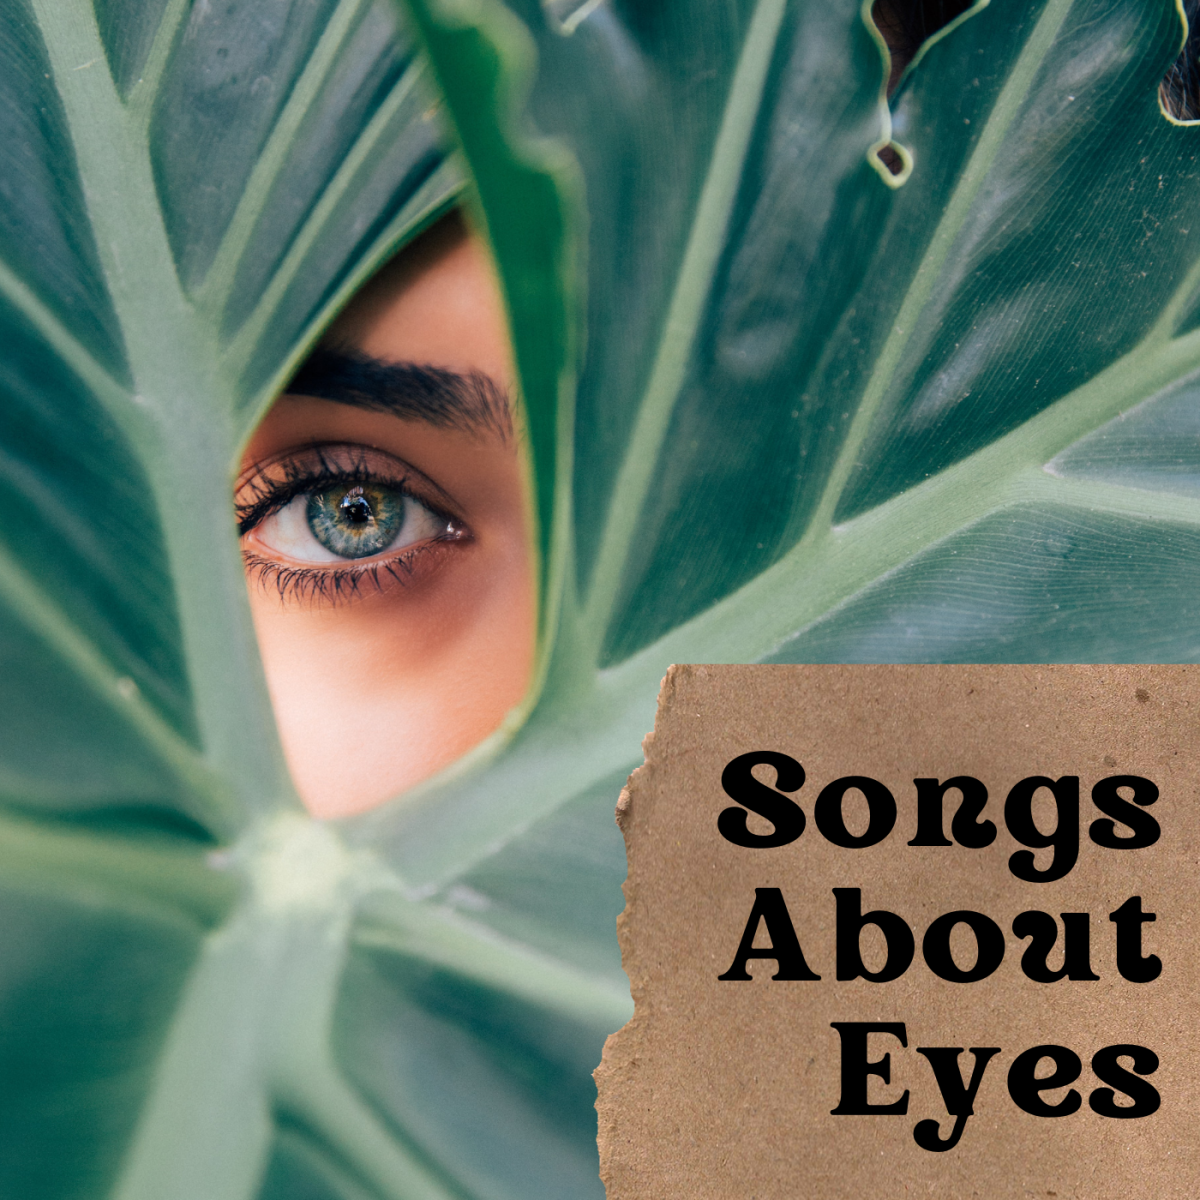 Celebrate eyes as the window to the soul with this playlist of songs. We have a long list of pop, rock and country eye tunes to help you out.